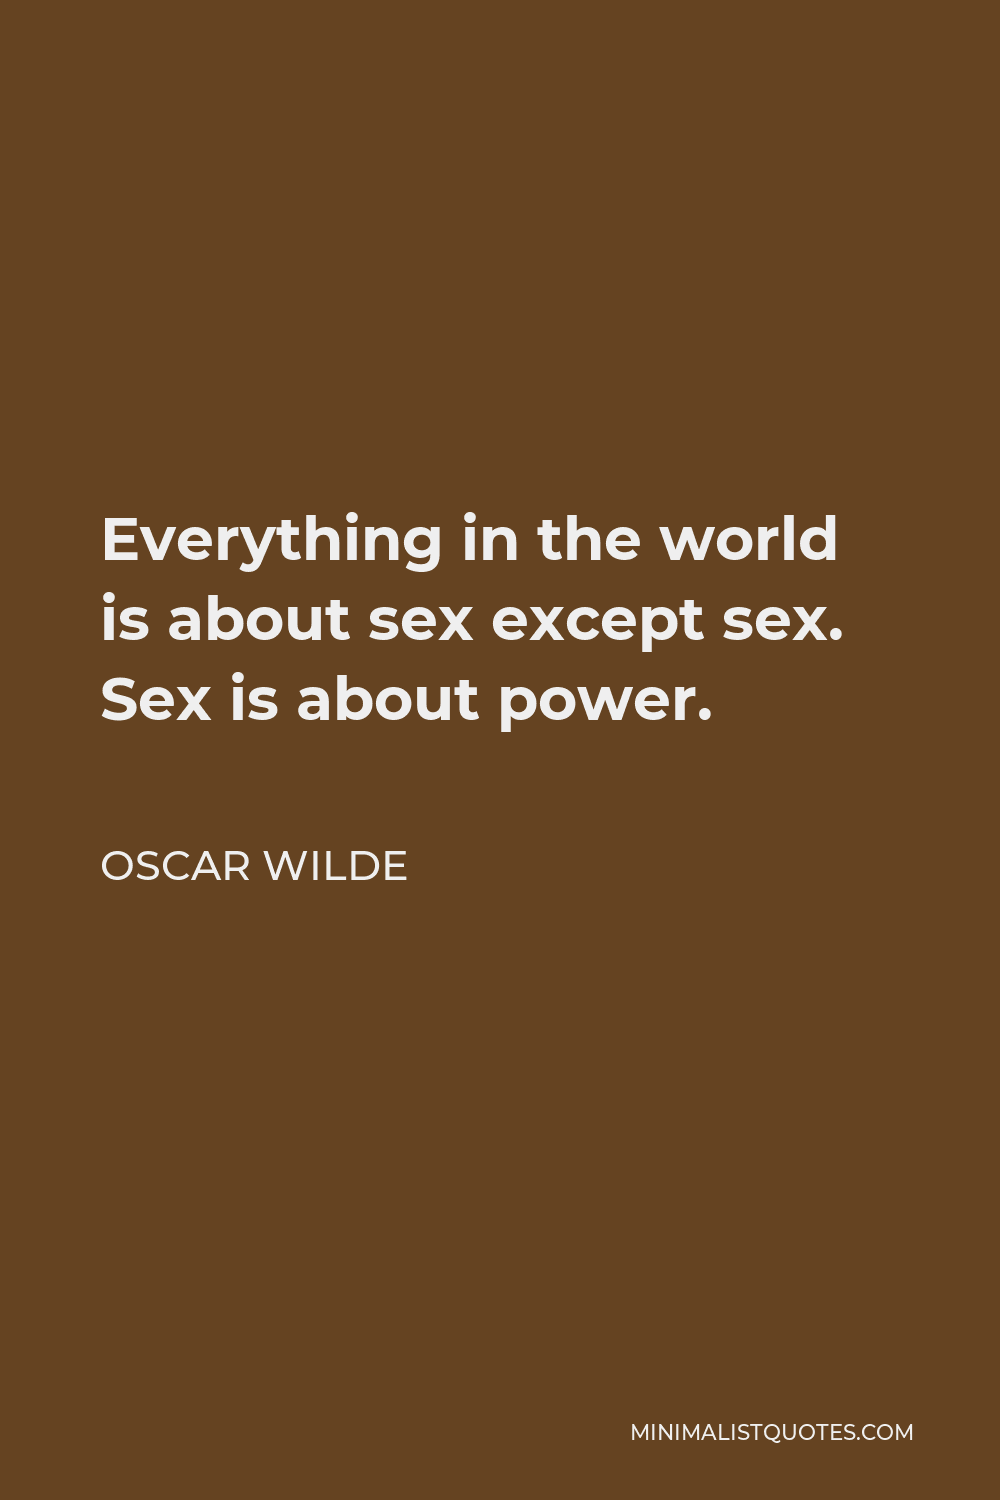 Oscar Wilde Quote - Everything in the world is about sex except sex. Sex is about power.